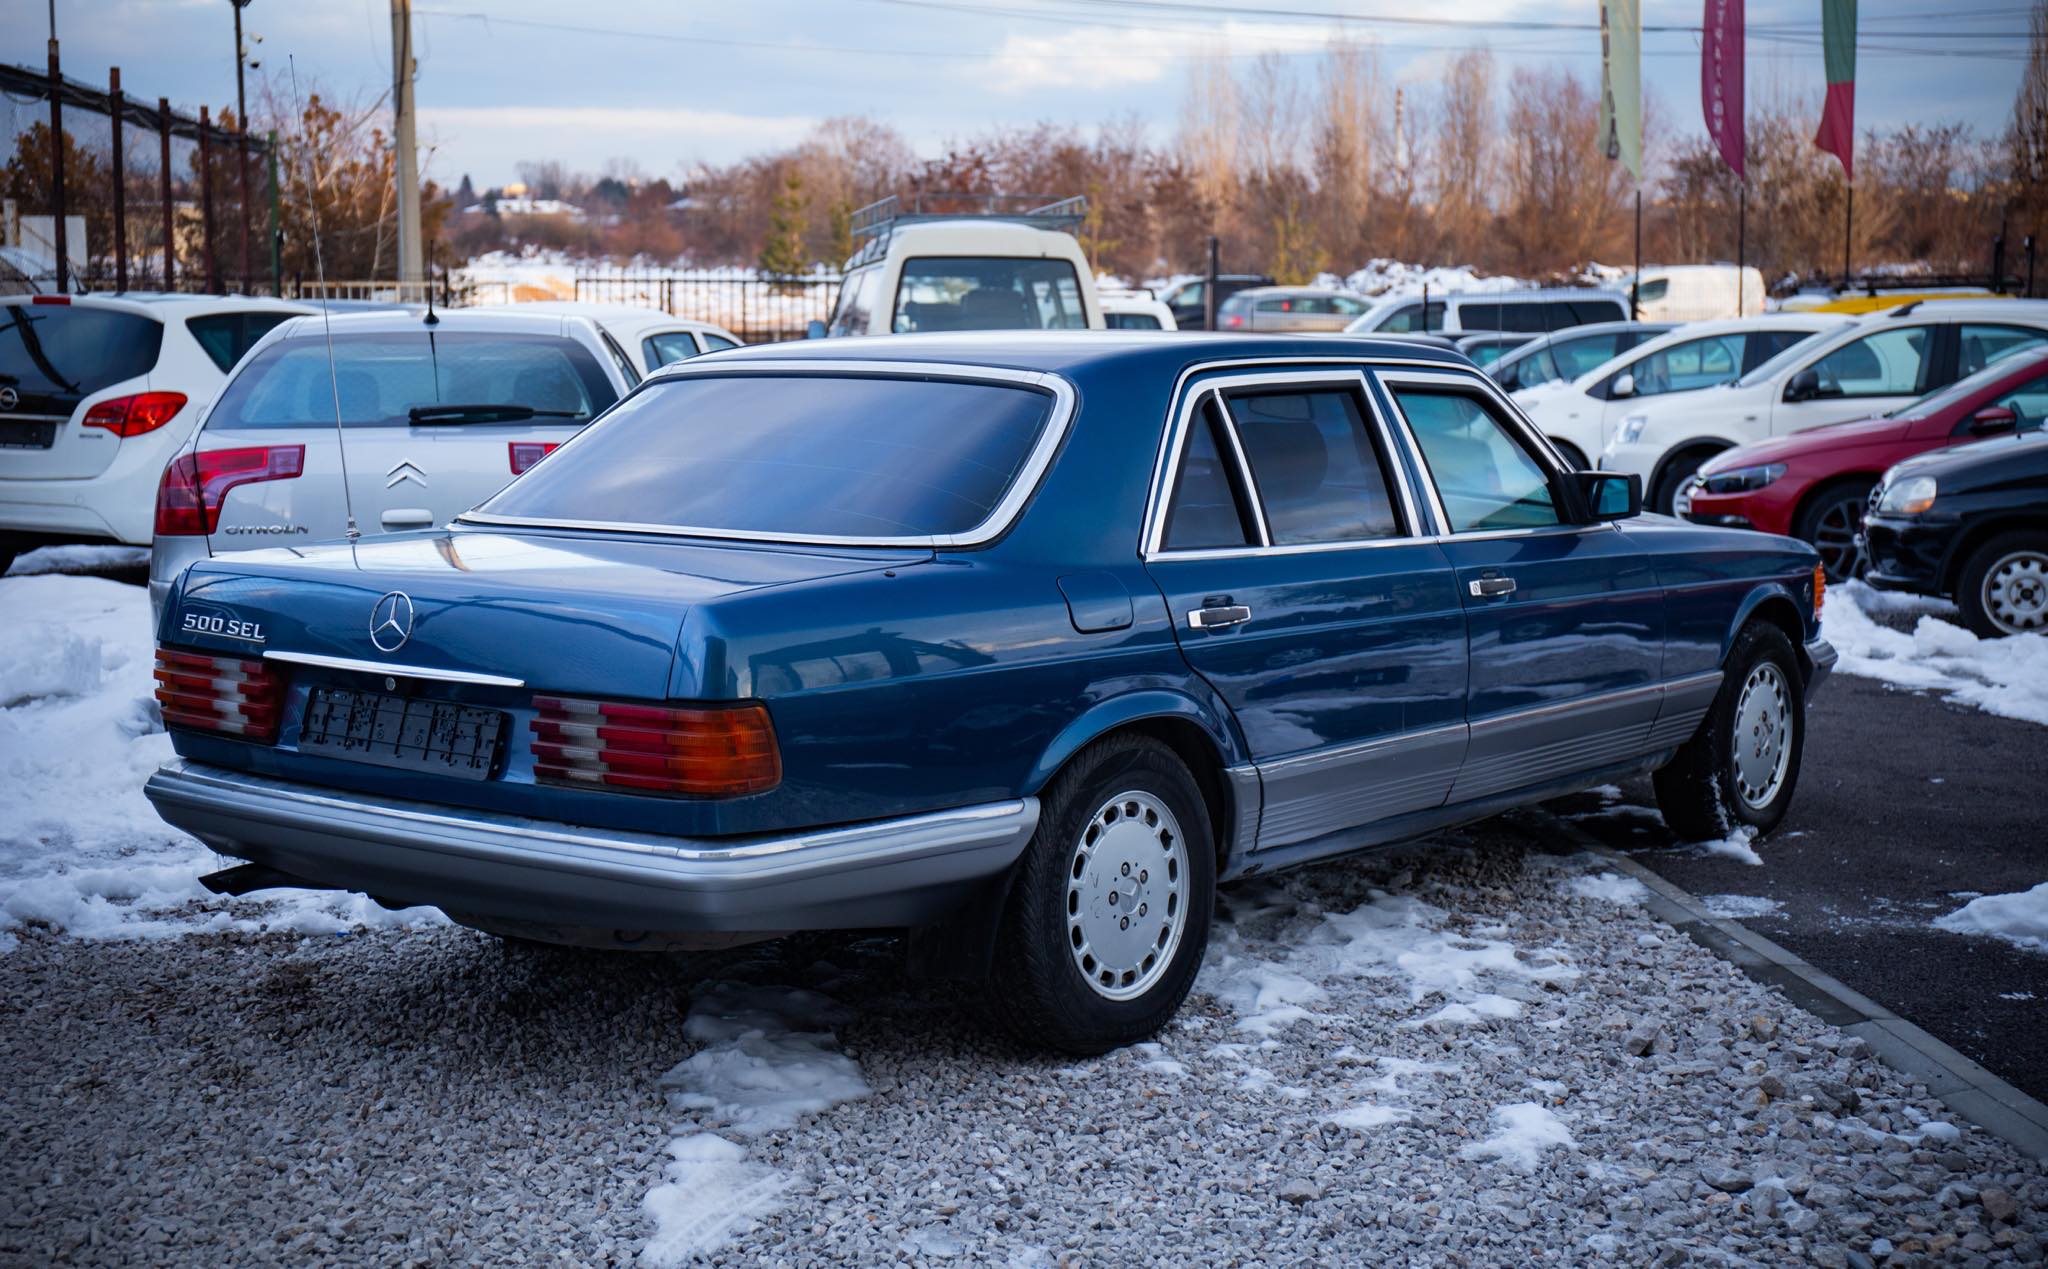 Mercedes-Benz W126 500SEL GUARD B6 ARMORED / BULLETPROOF - Getyourclassic